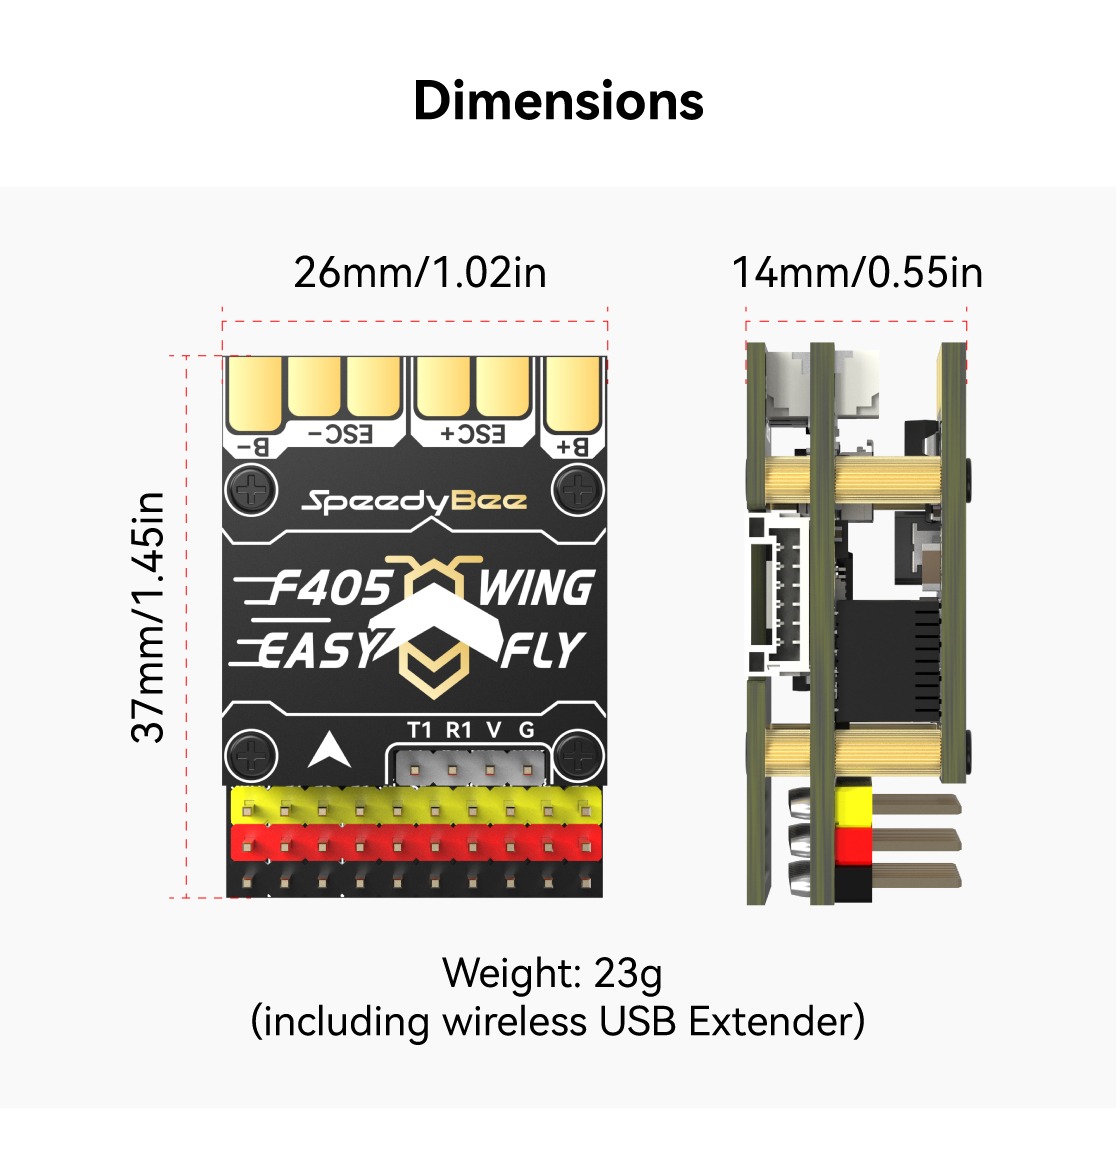 Product image of SpeedyBee-F405-WING-MINI-Fixed-Wing-Flight-Controller - dimensions